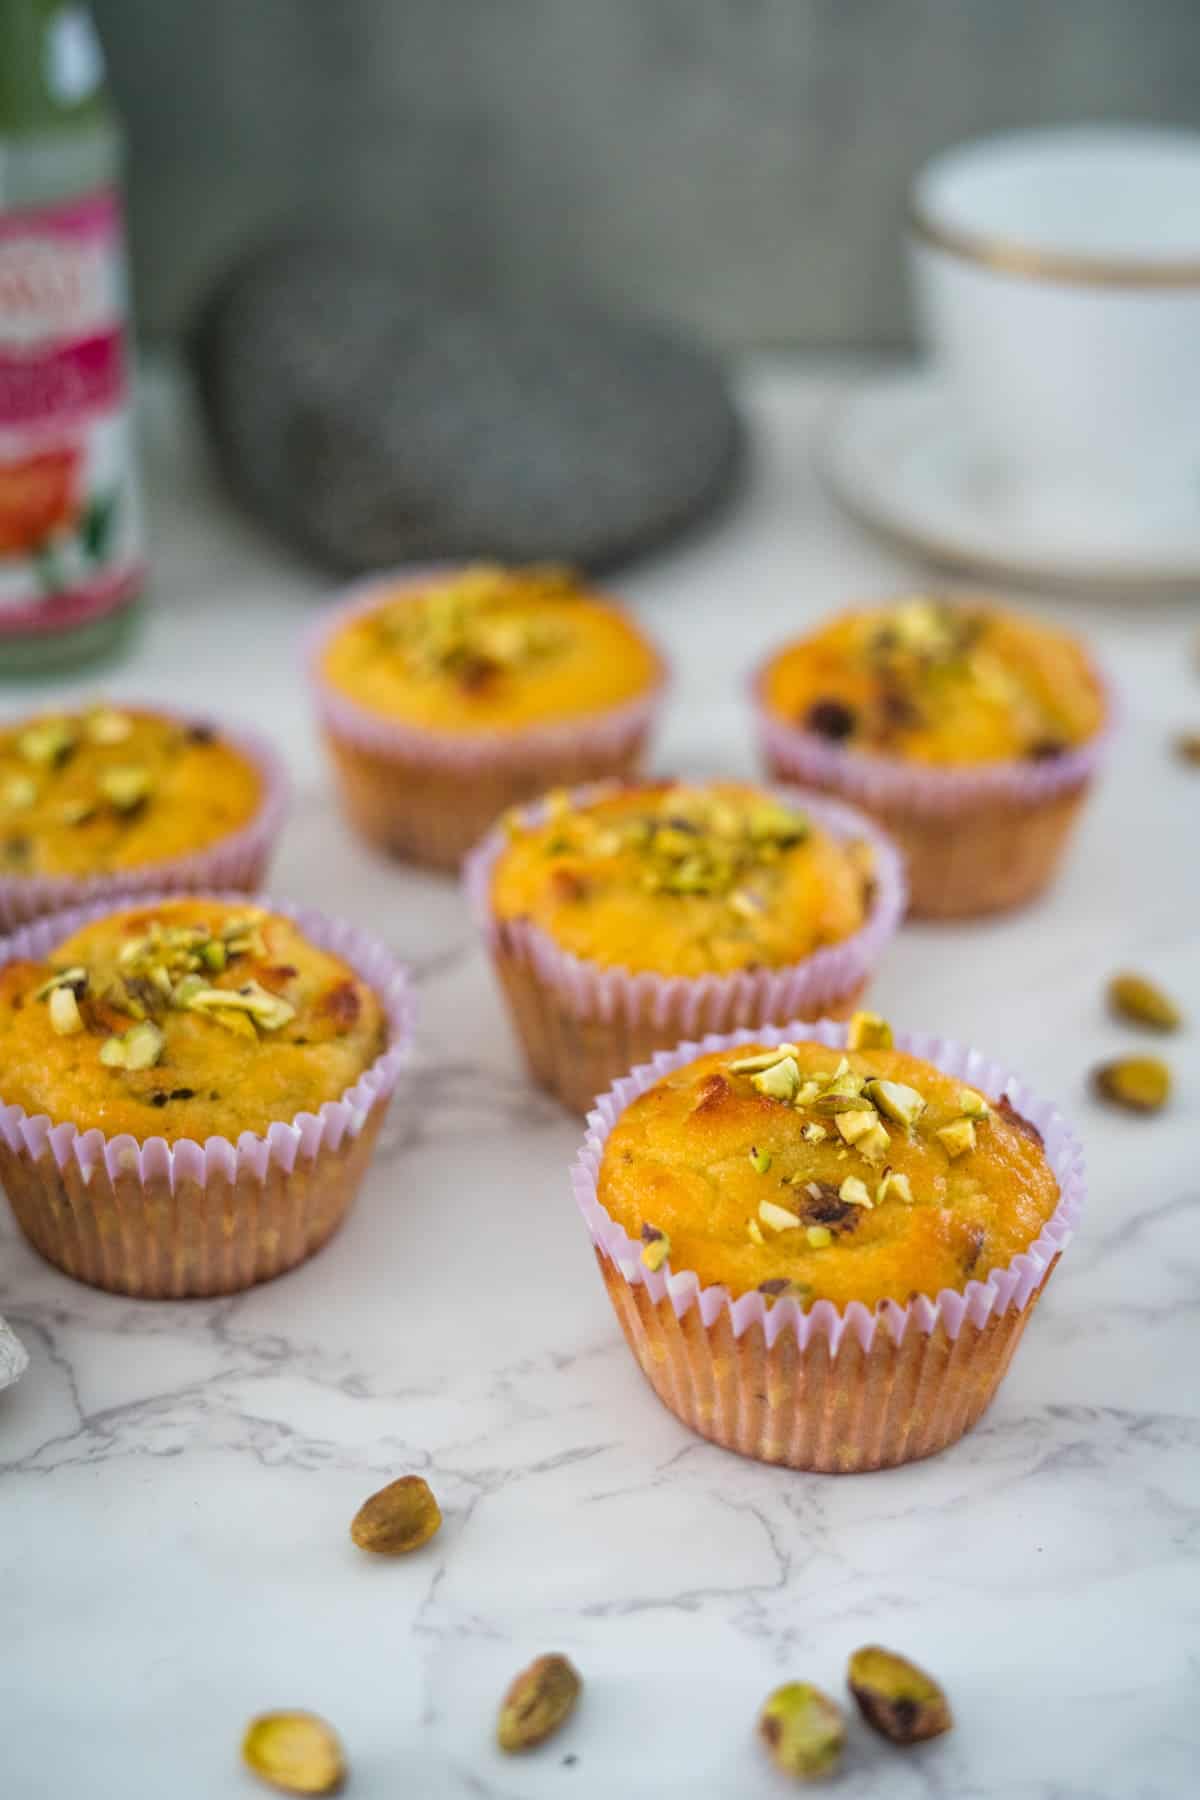 A group of pistachio muffins.